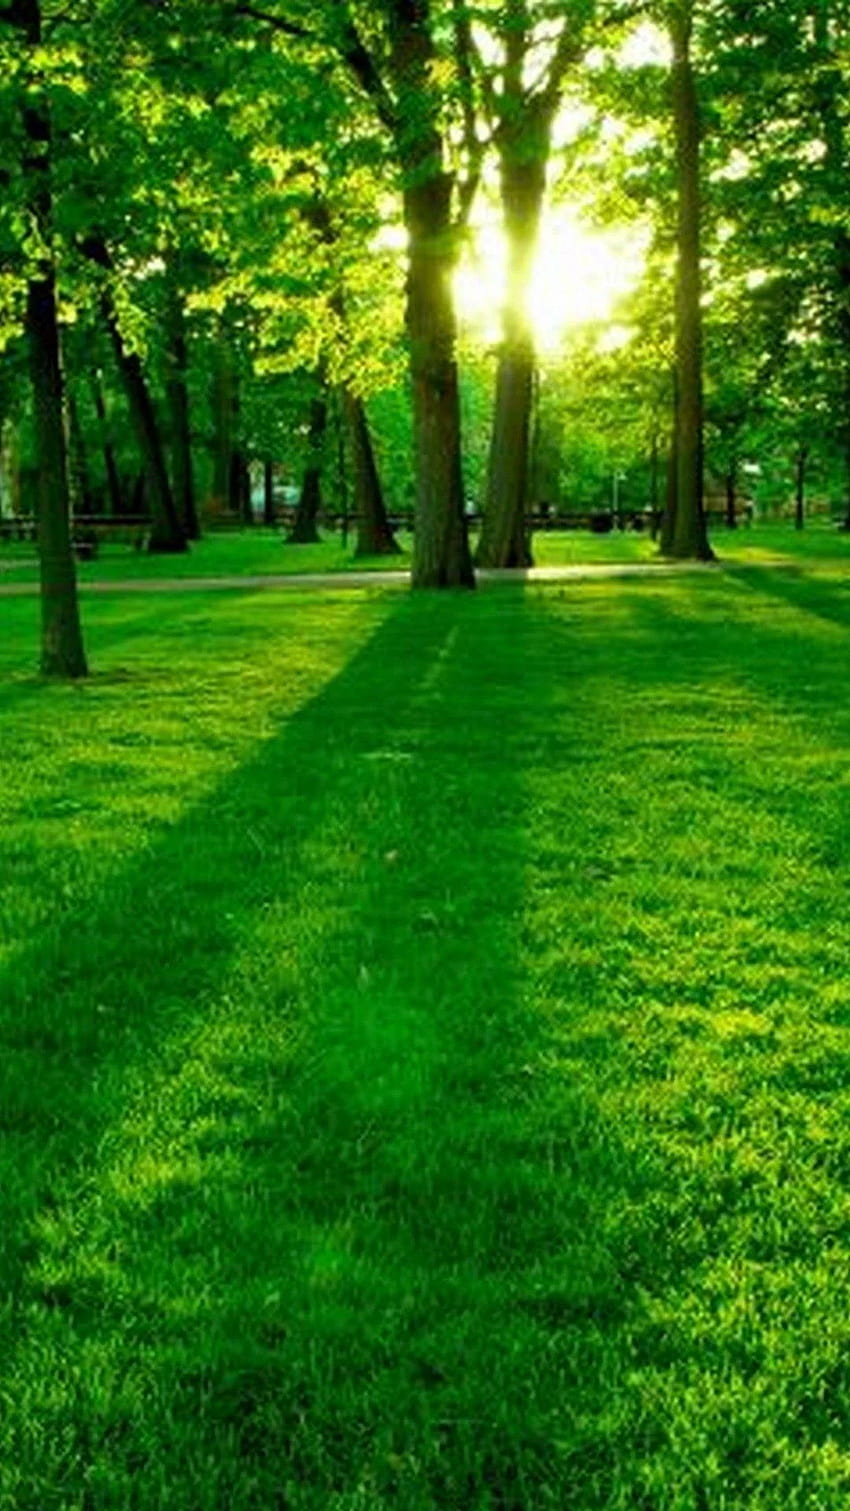 Nature Green For Android, best nature mobile HD phone wallpaper ...